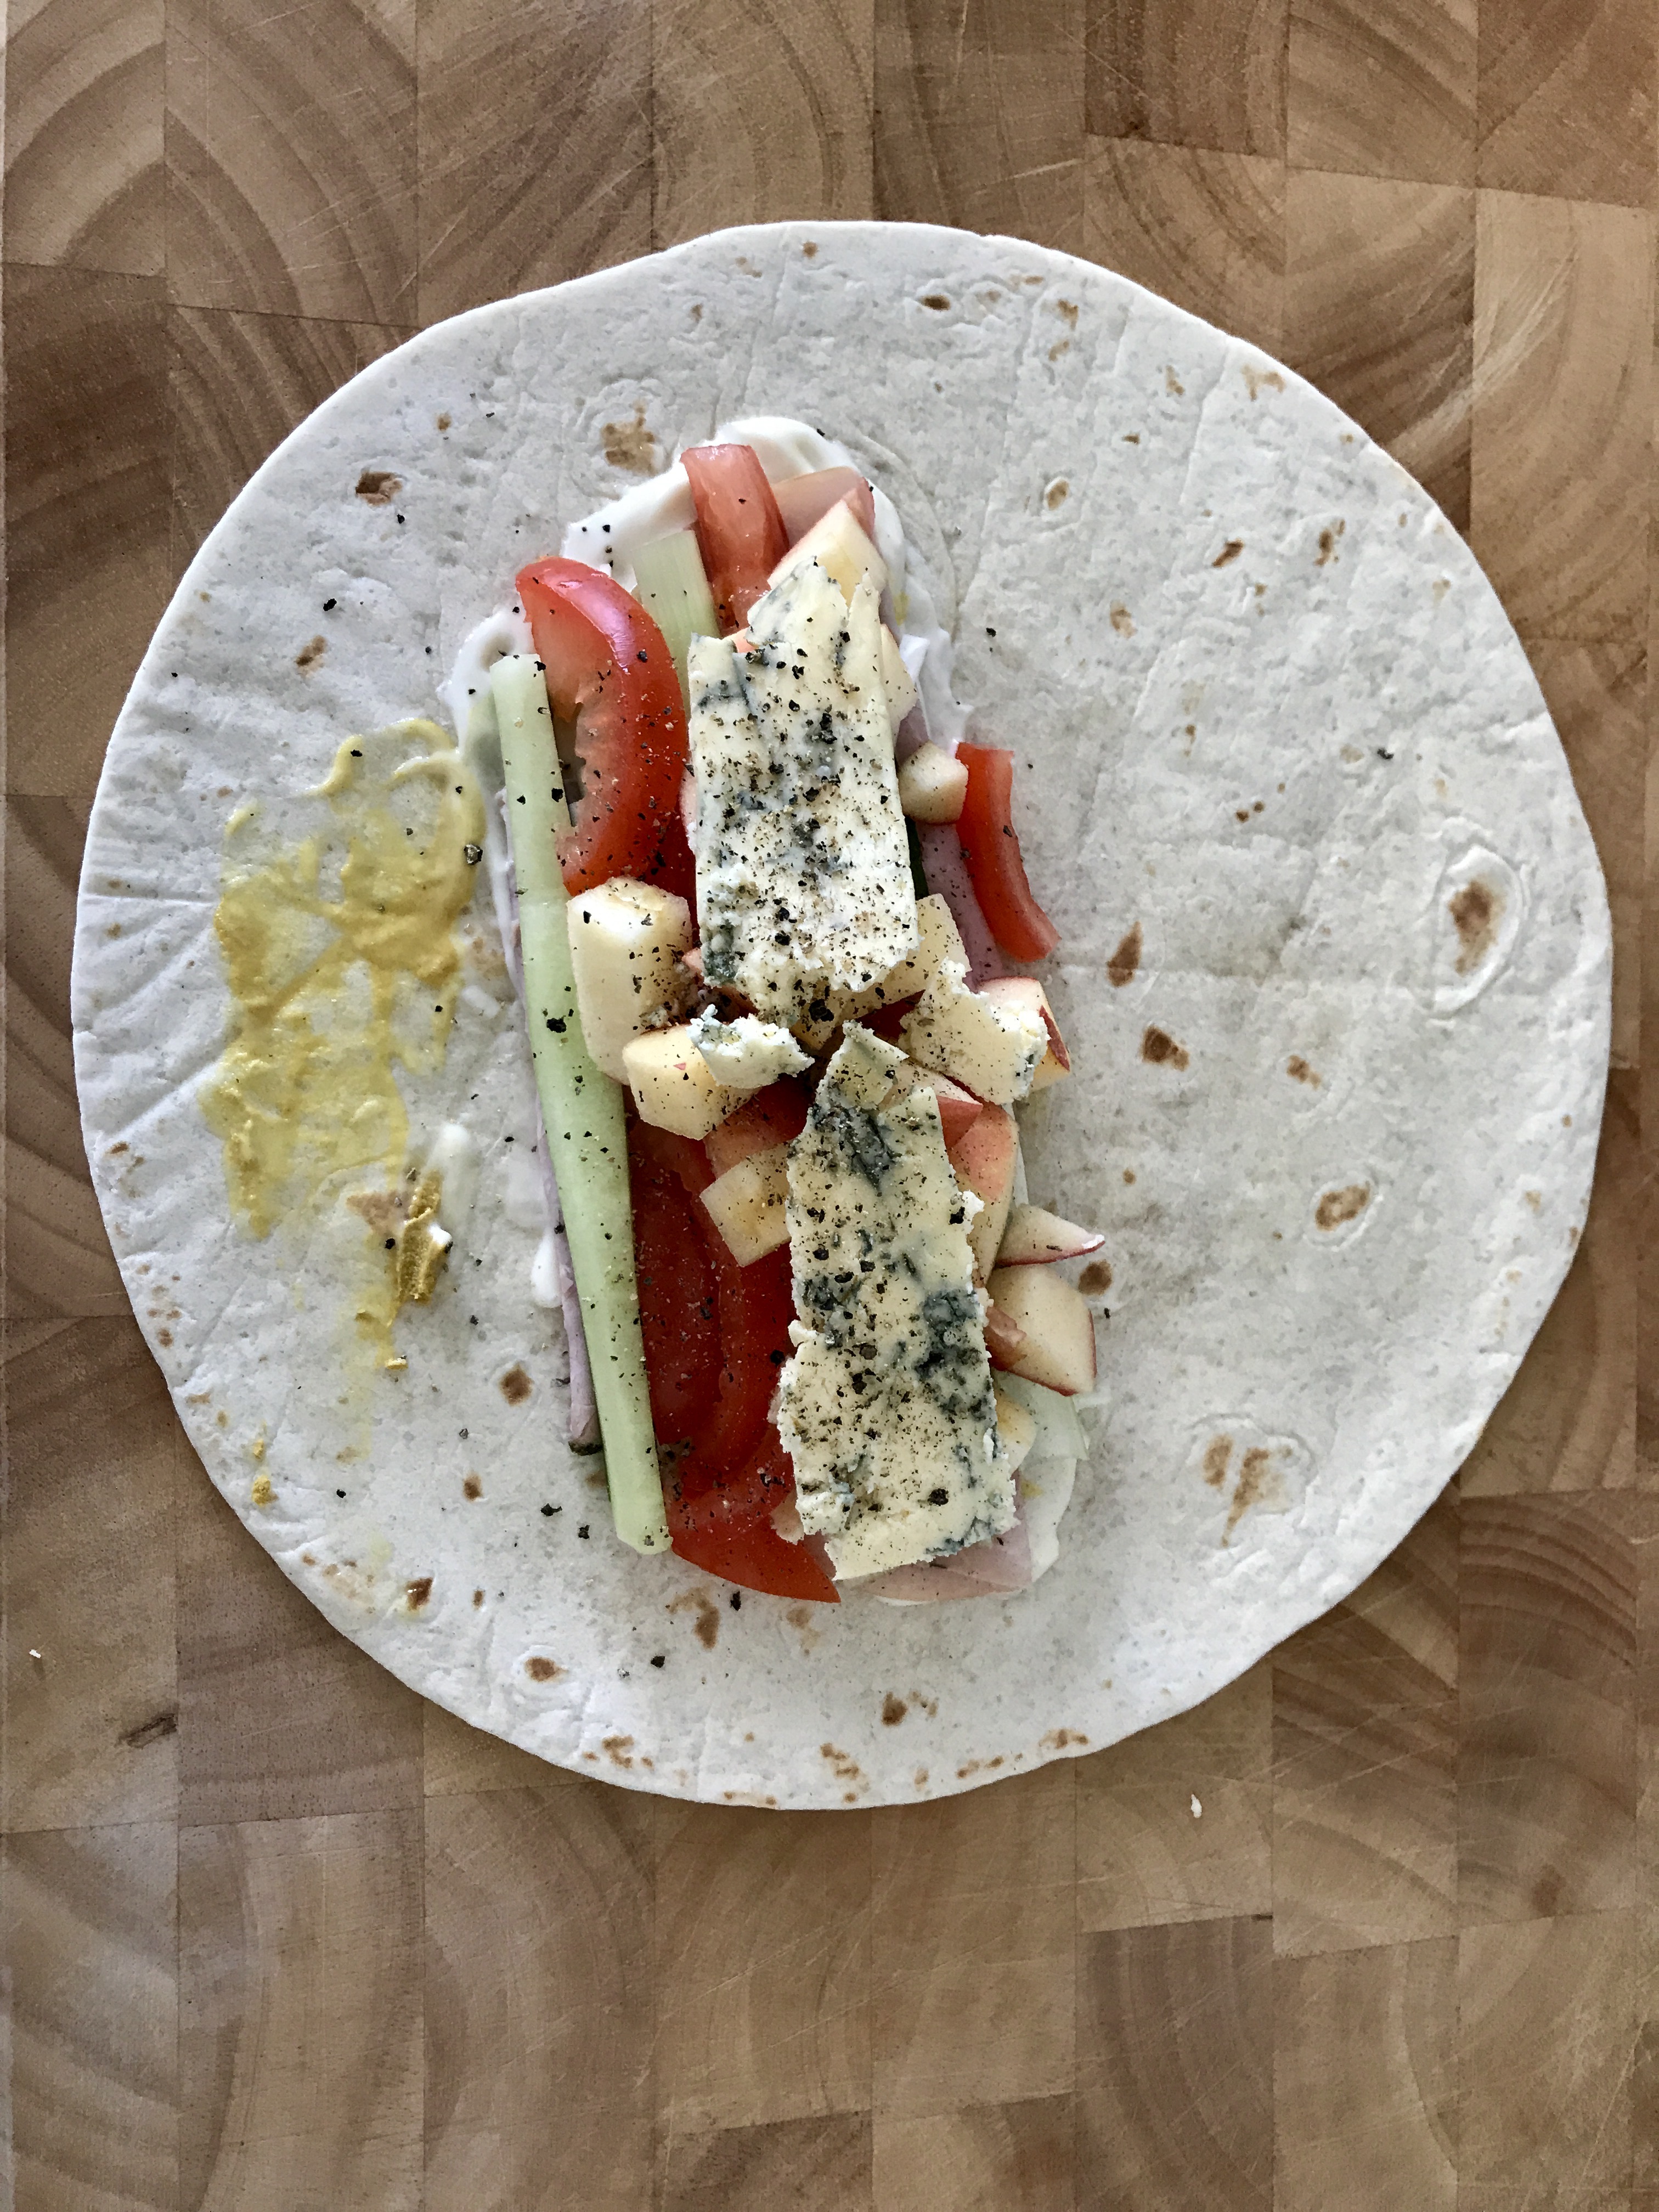 Pork, Apple, Blue Cheese Wrap open on a chopping board, viewed from above.